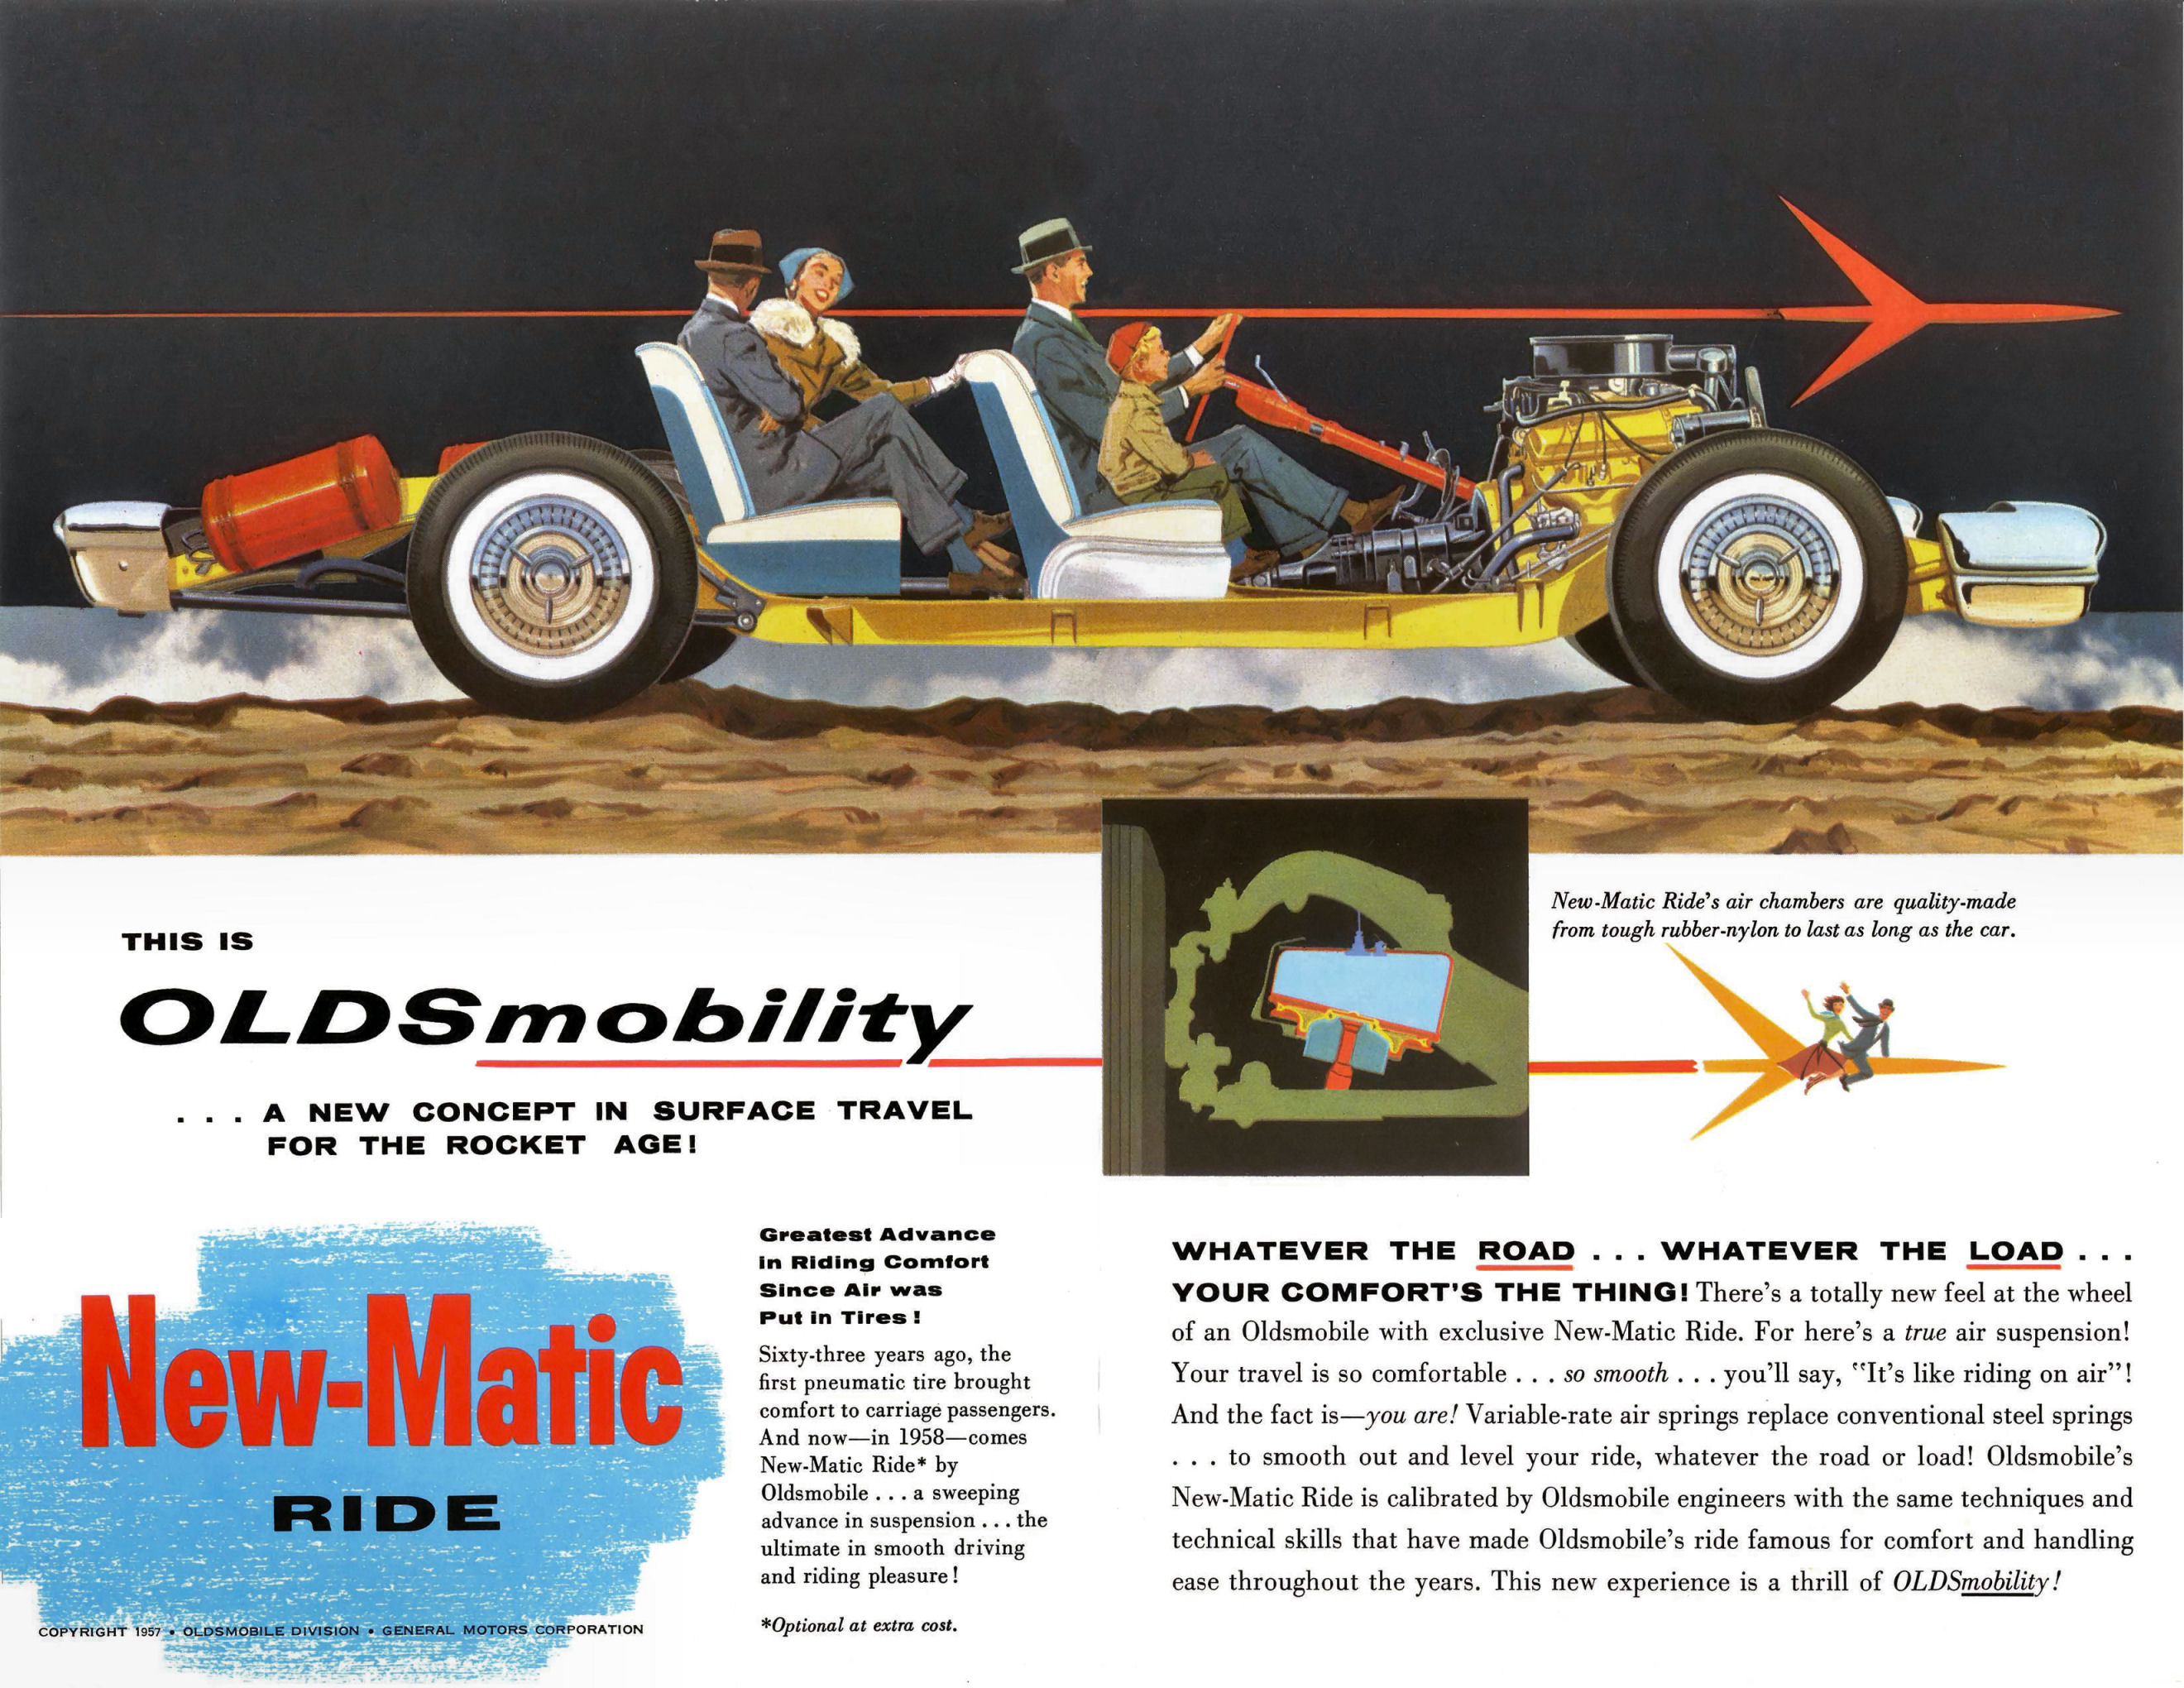 1958_Oldsmobile_New-Matic_Ride-02-03